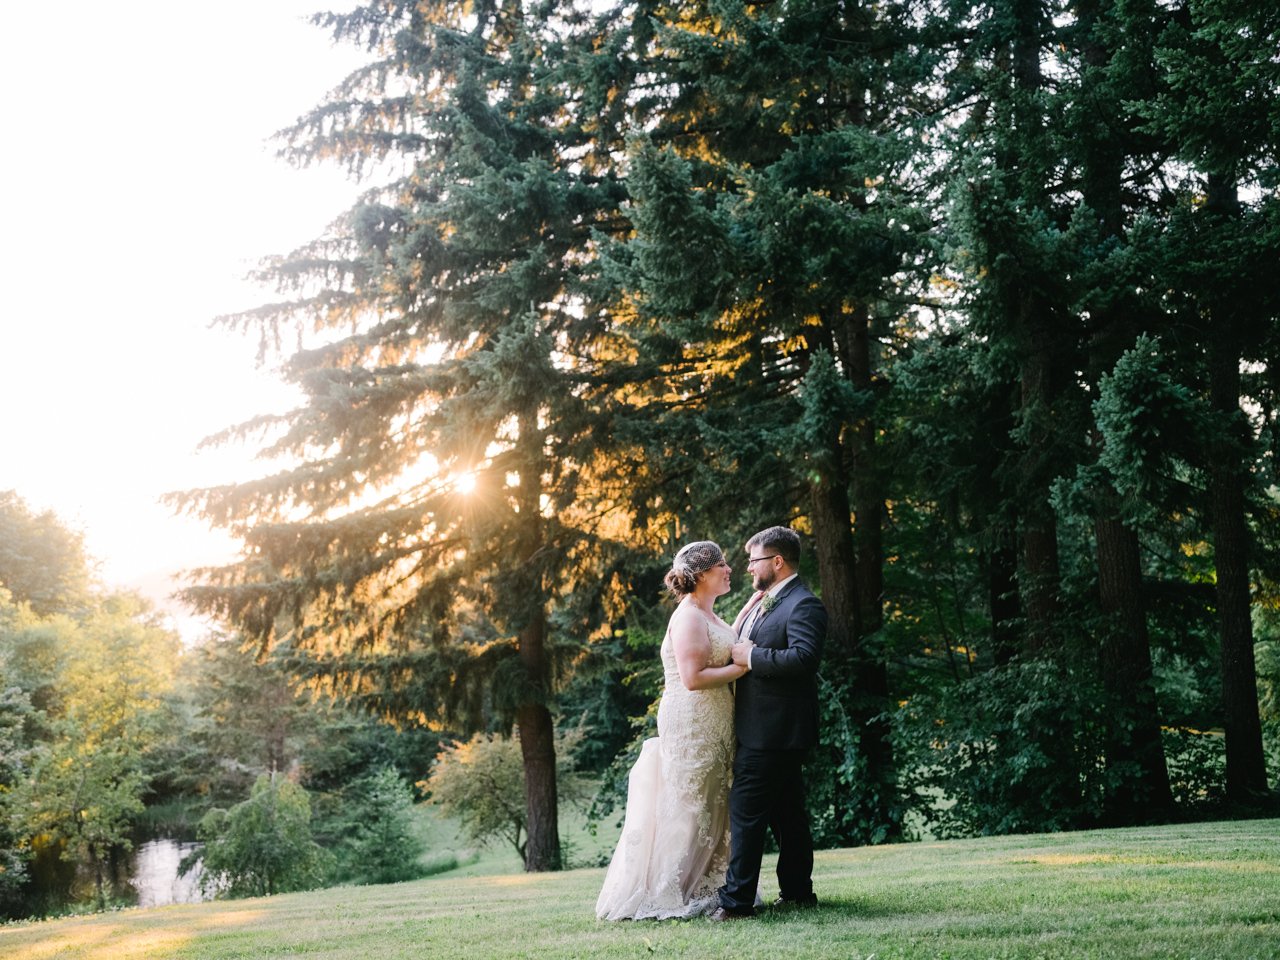  Sunset shines through tall fir trees at bridal veil lakes in evening wedding portraits 